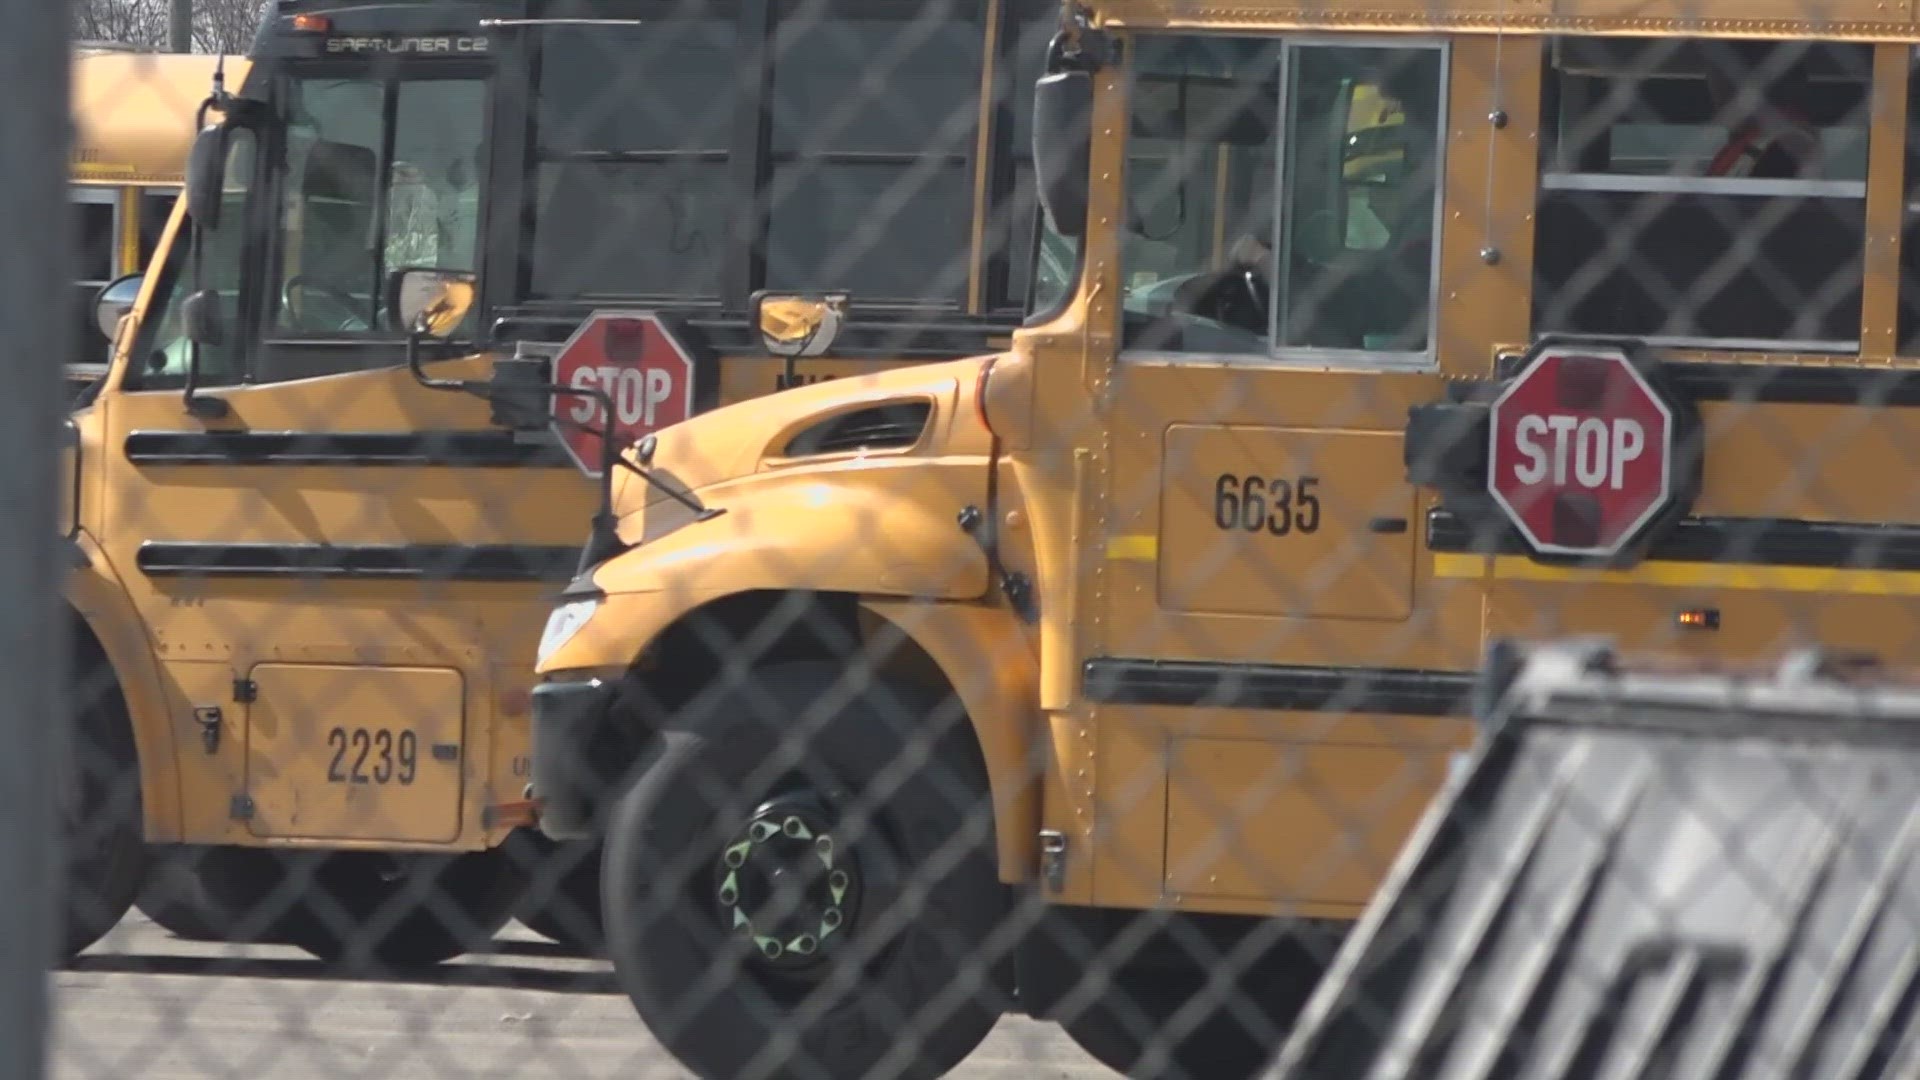 St. Louis Public Schools canceled after-school activities after a protest by bus drivers left the district scrambling for transportation Monday afternoon.